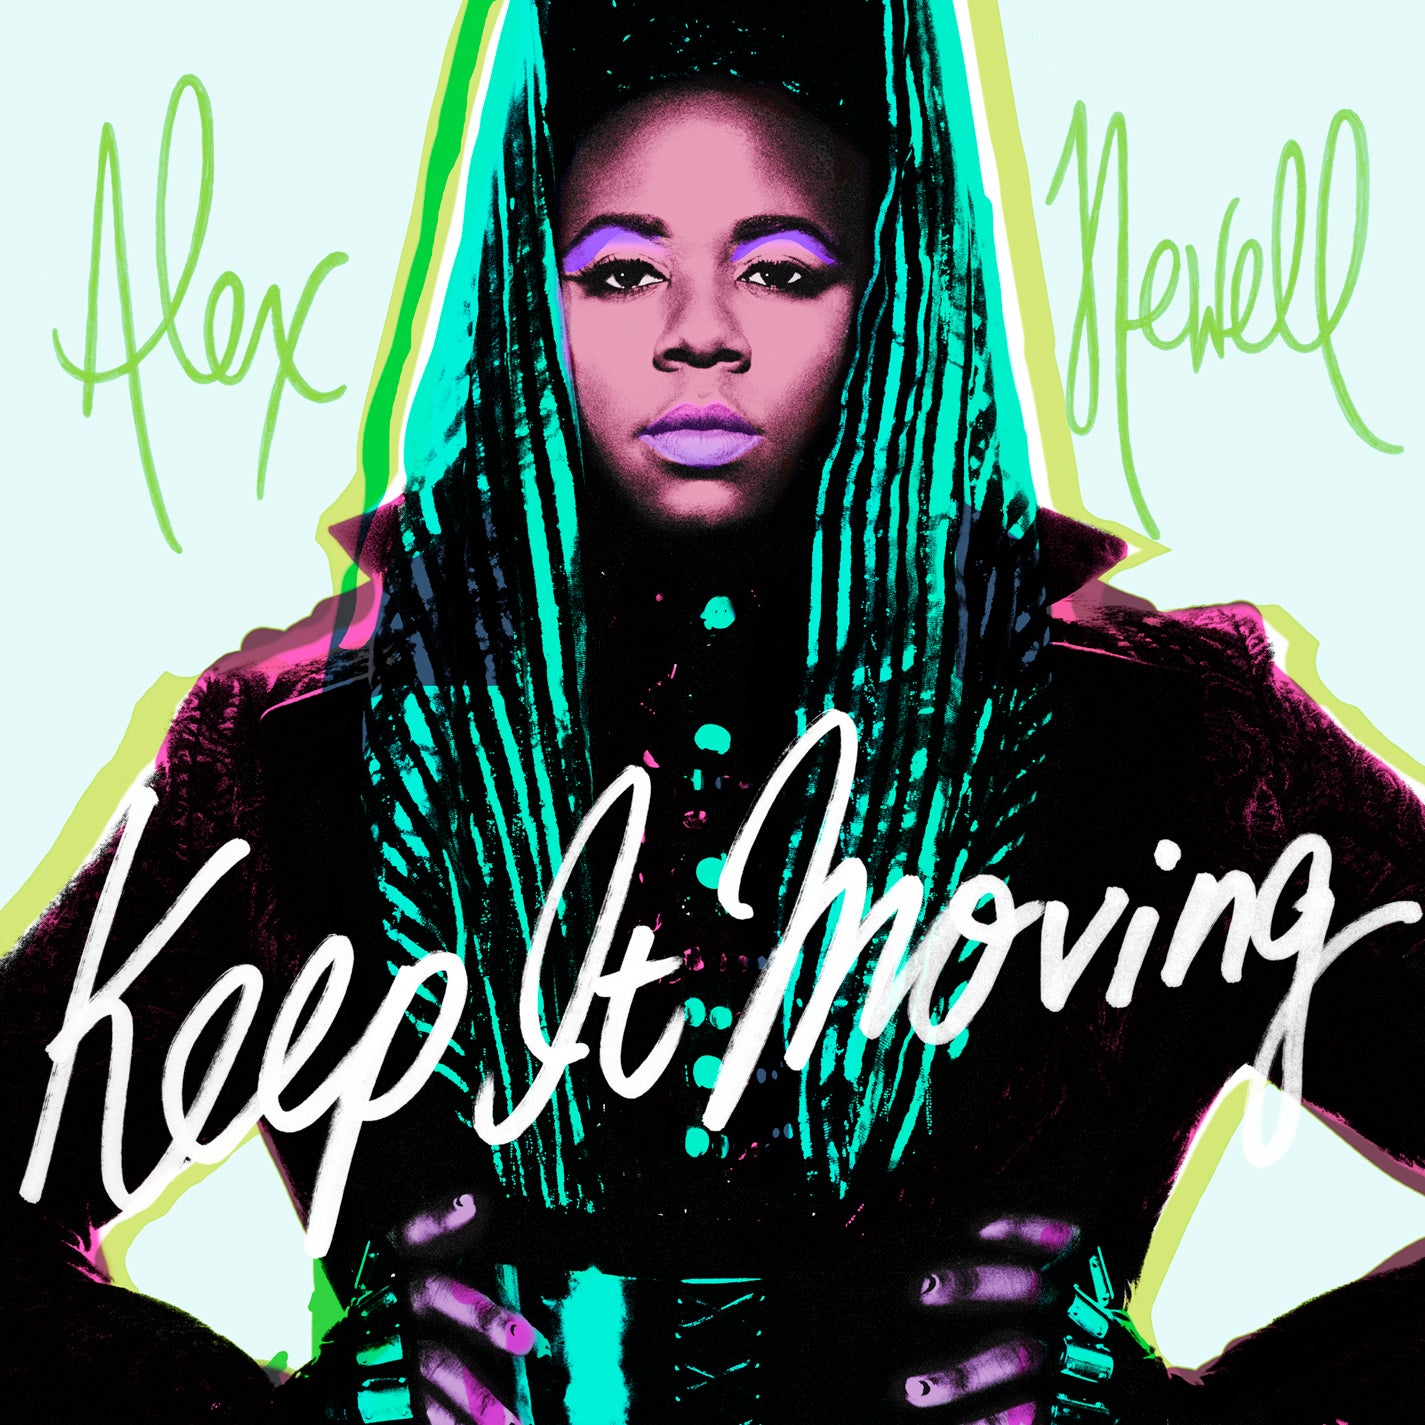 Listen To Alex Newell's Vibrant New Song "Keep It Moving"
